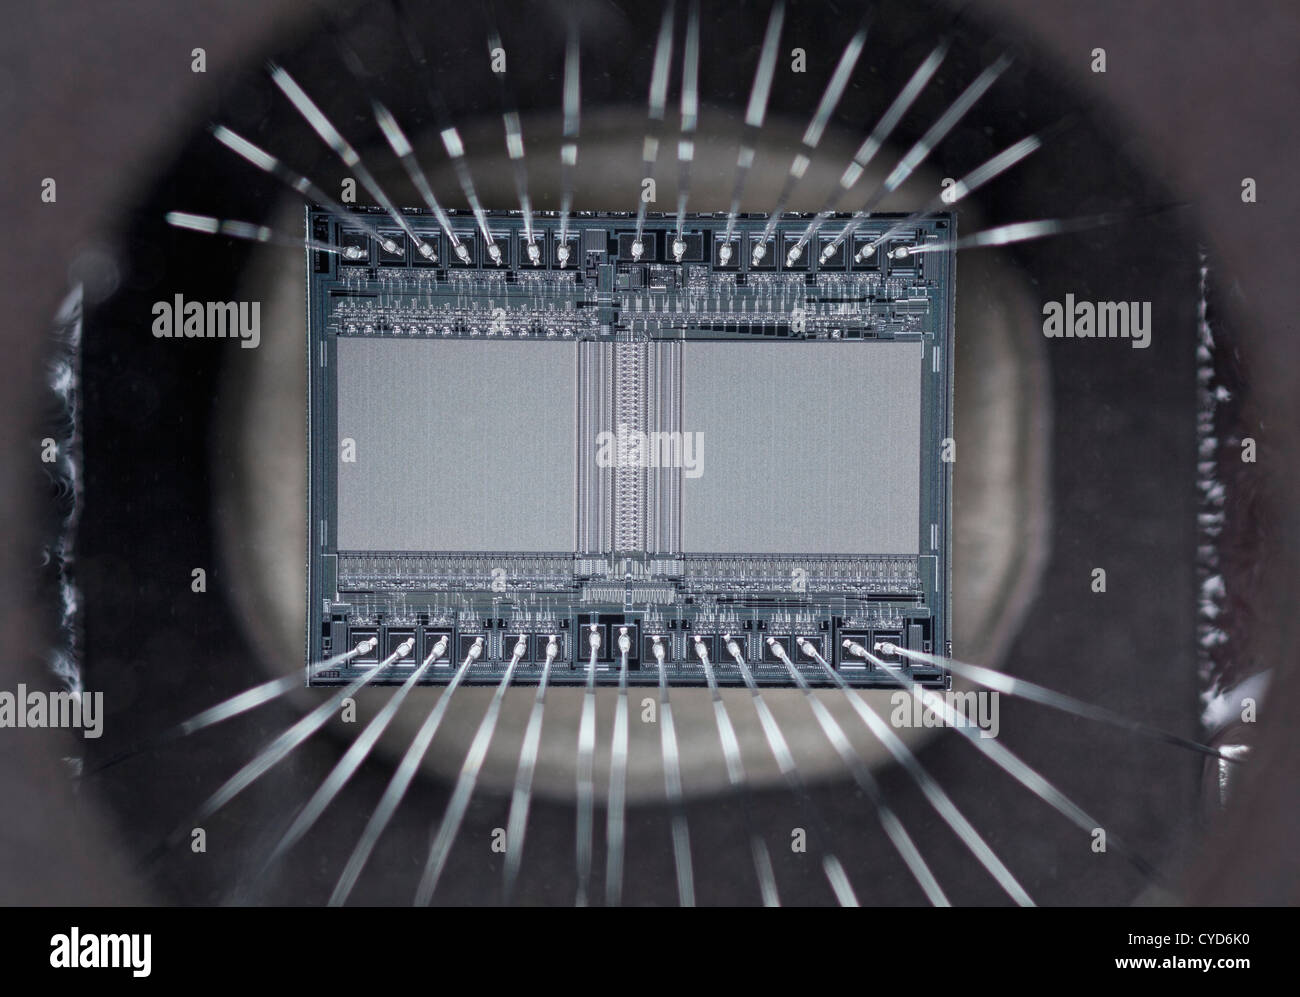 Eprom memory chip with connecting silver wires Stock Photo